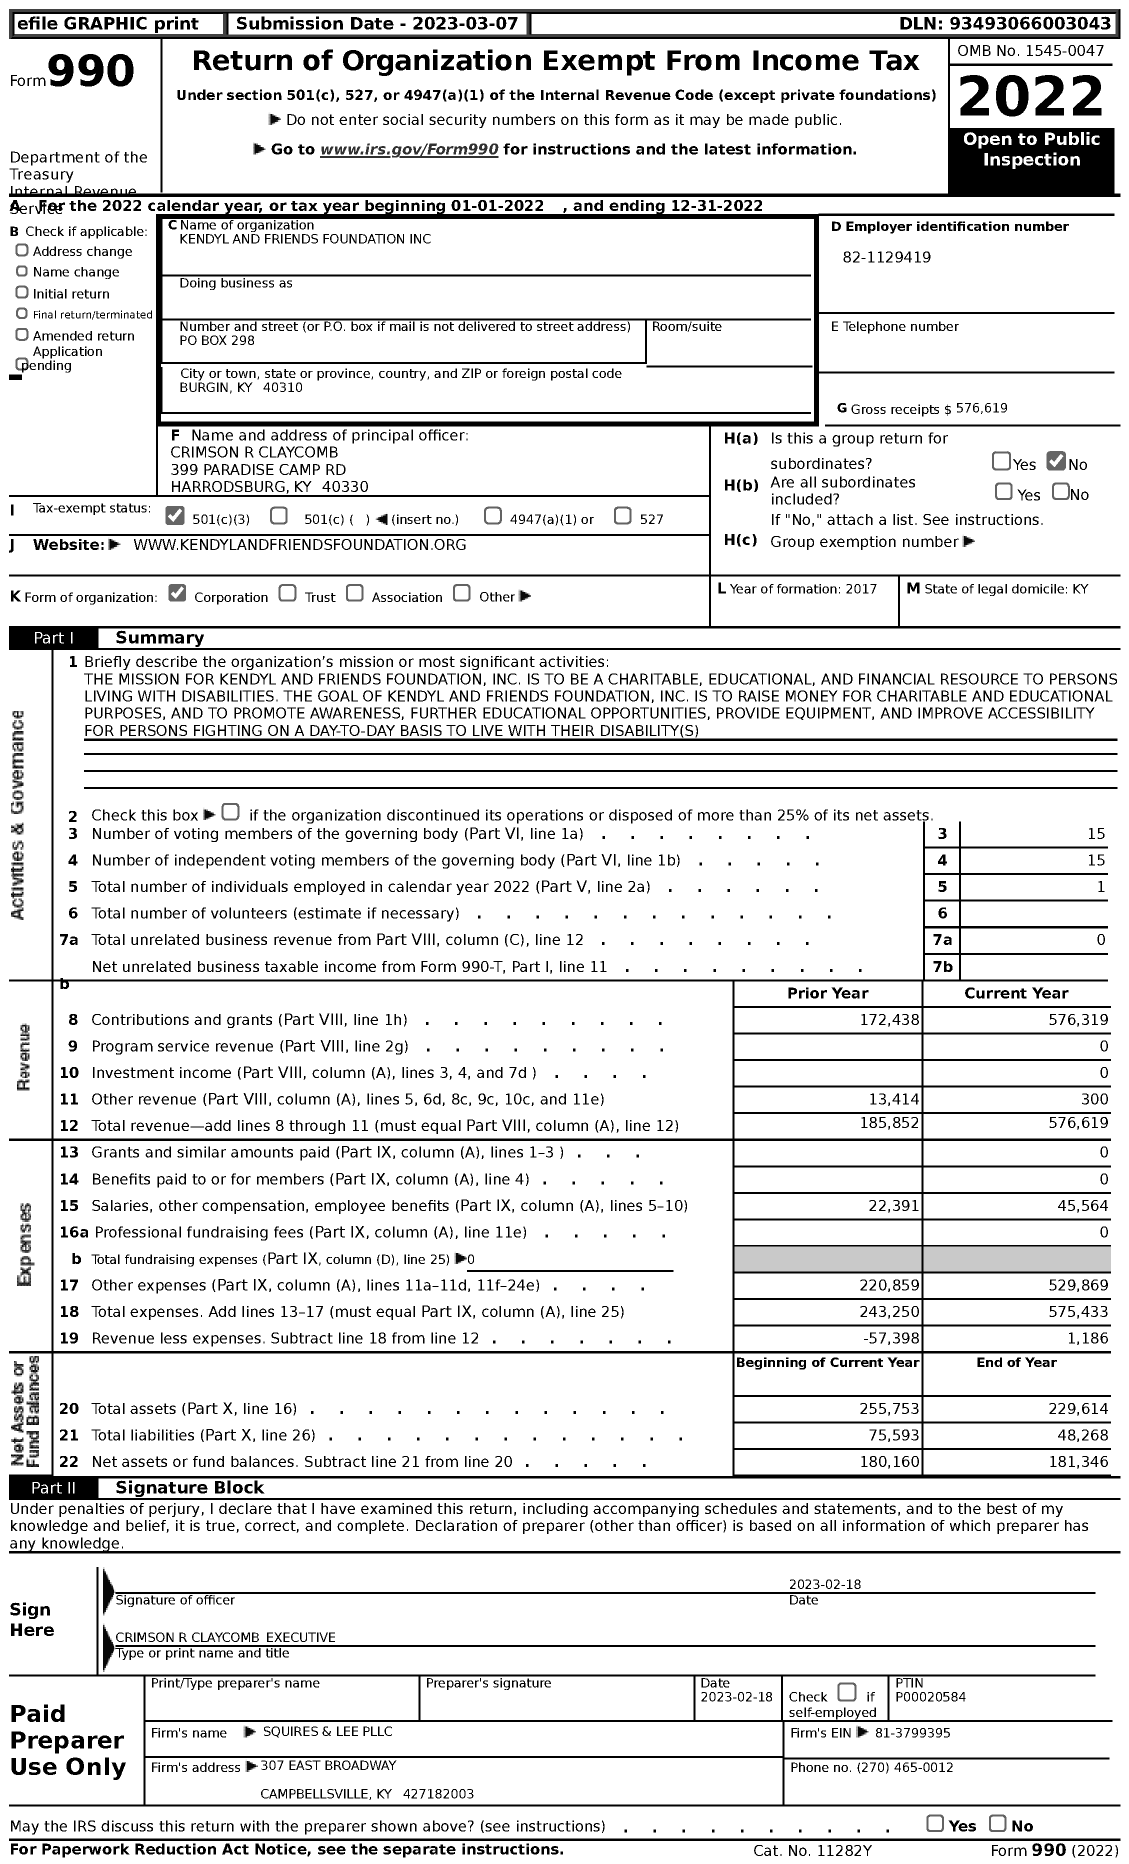 Image of first page of 2022 Form 990 for Kendyl and Friends Foundation